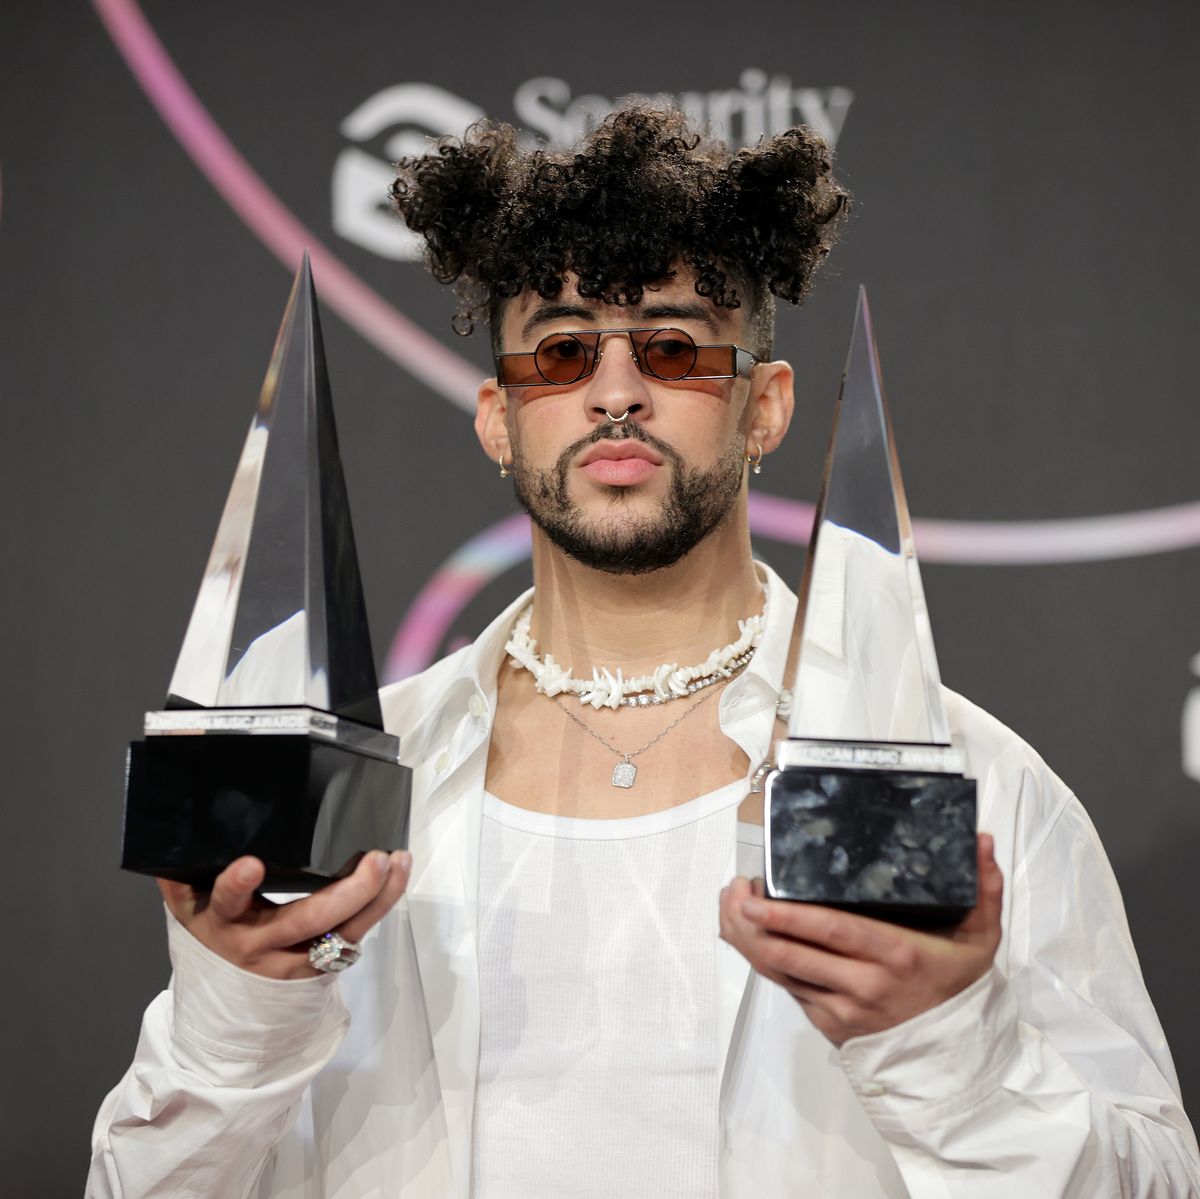 Bad Bunny Is Spotify's Most-Streamed Artist for 2nd Year in a Row